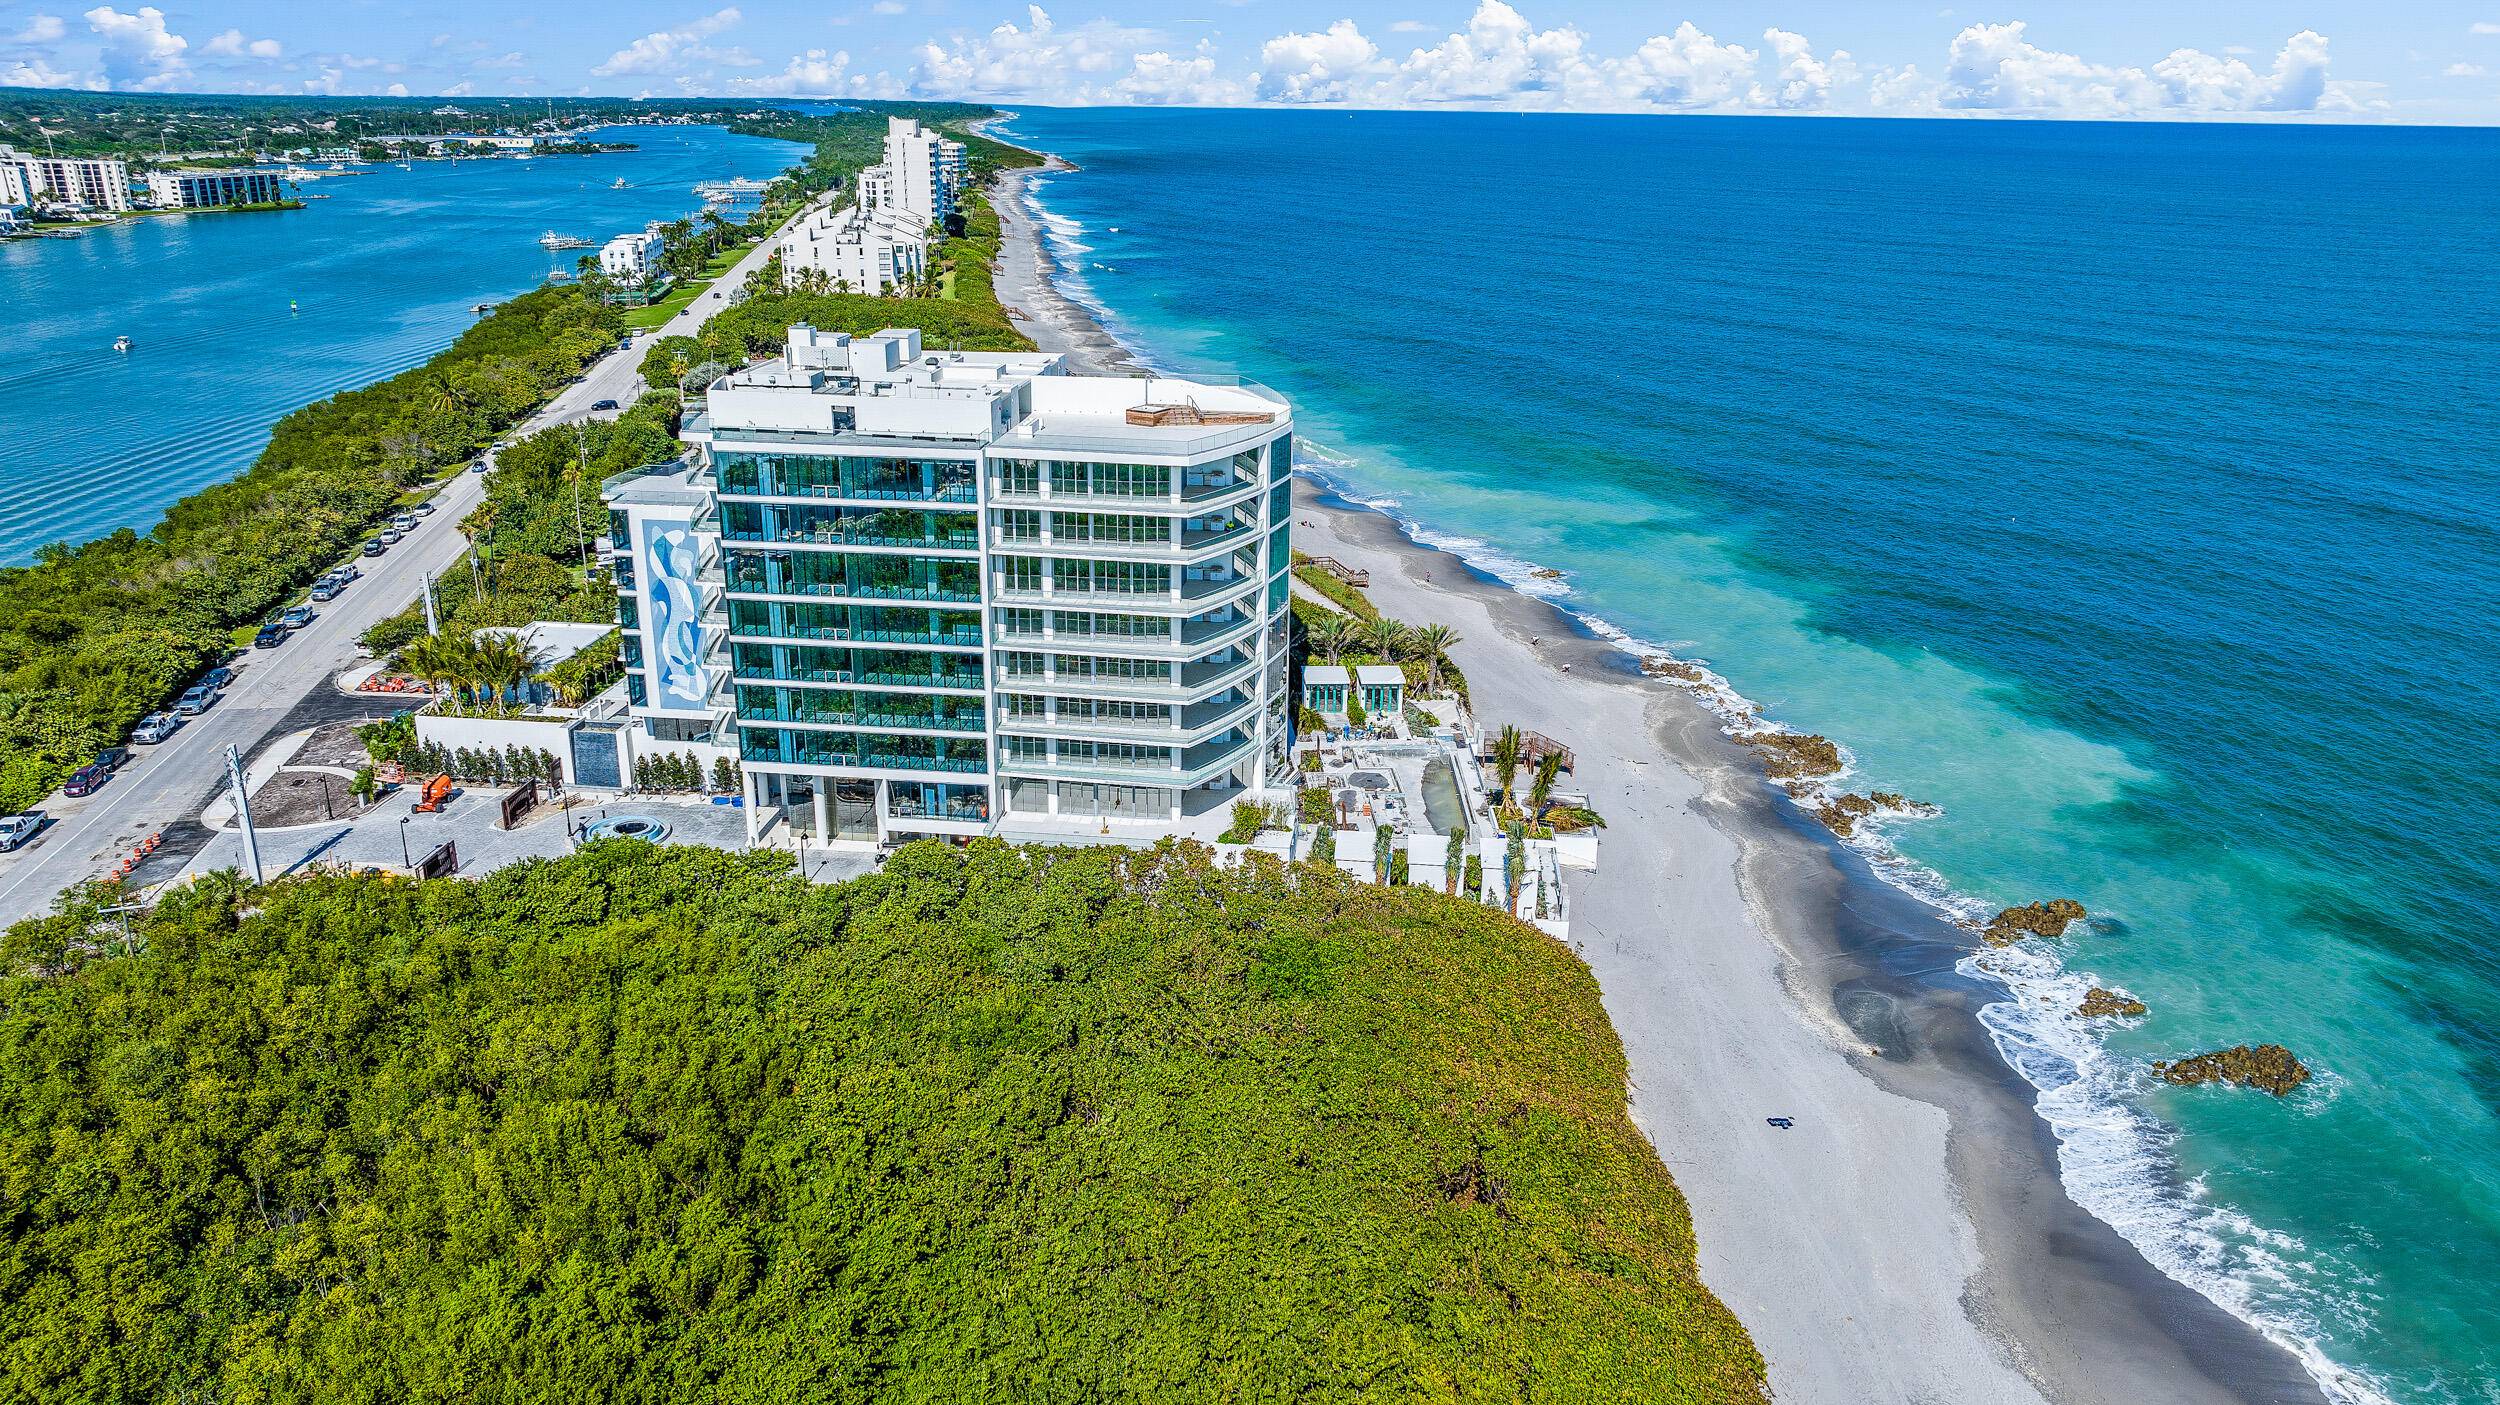 Just finished 2022 new construction condominium nestled between two parks, preserves, with unobstructed views of the Atlantic Ocean and Intracoastal waterway.